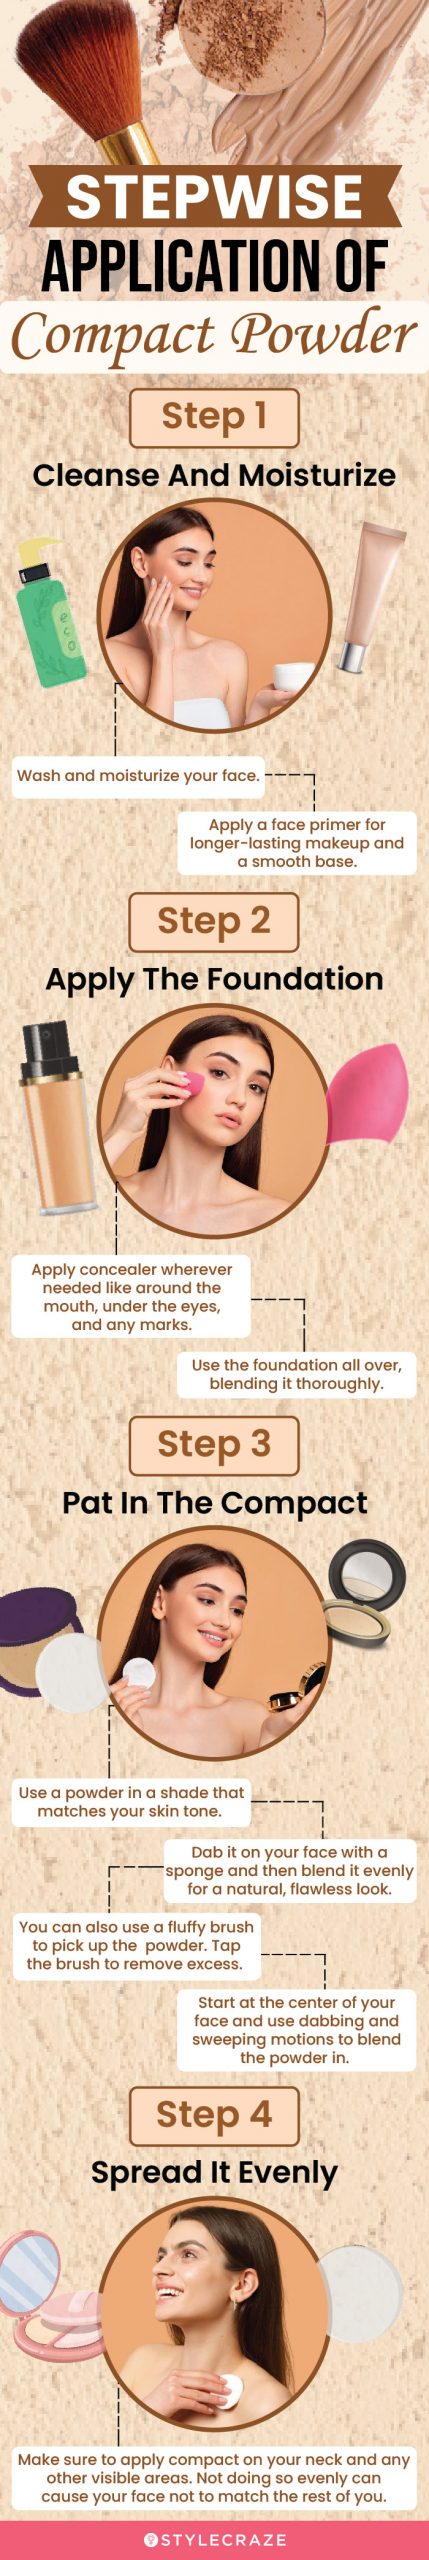 stepwise application of compact powder [infographic]